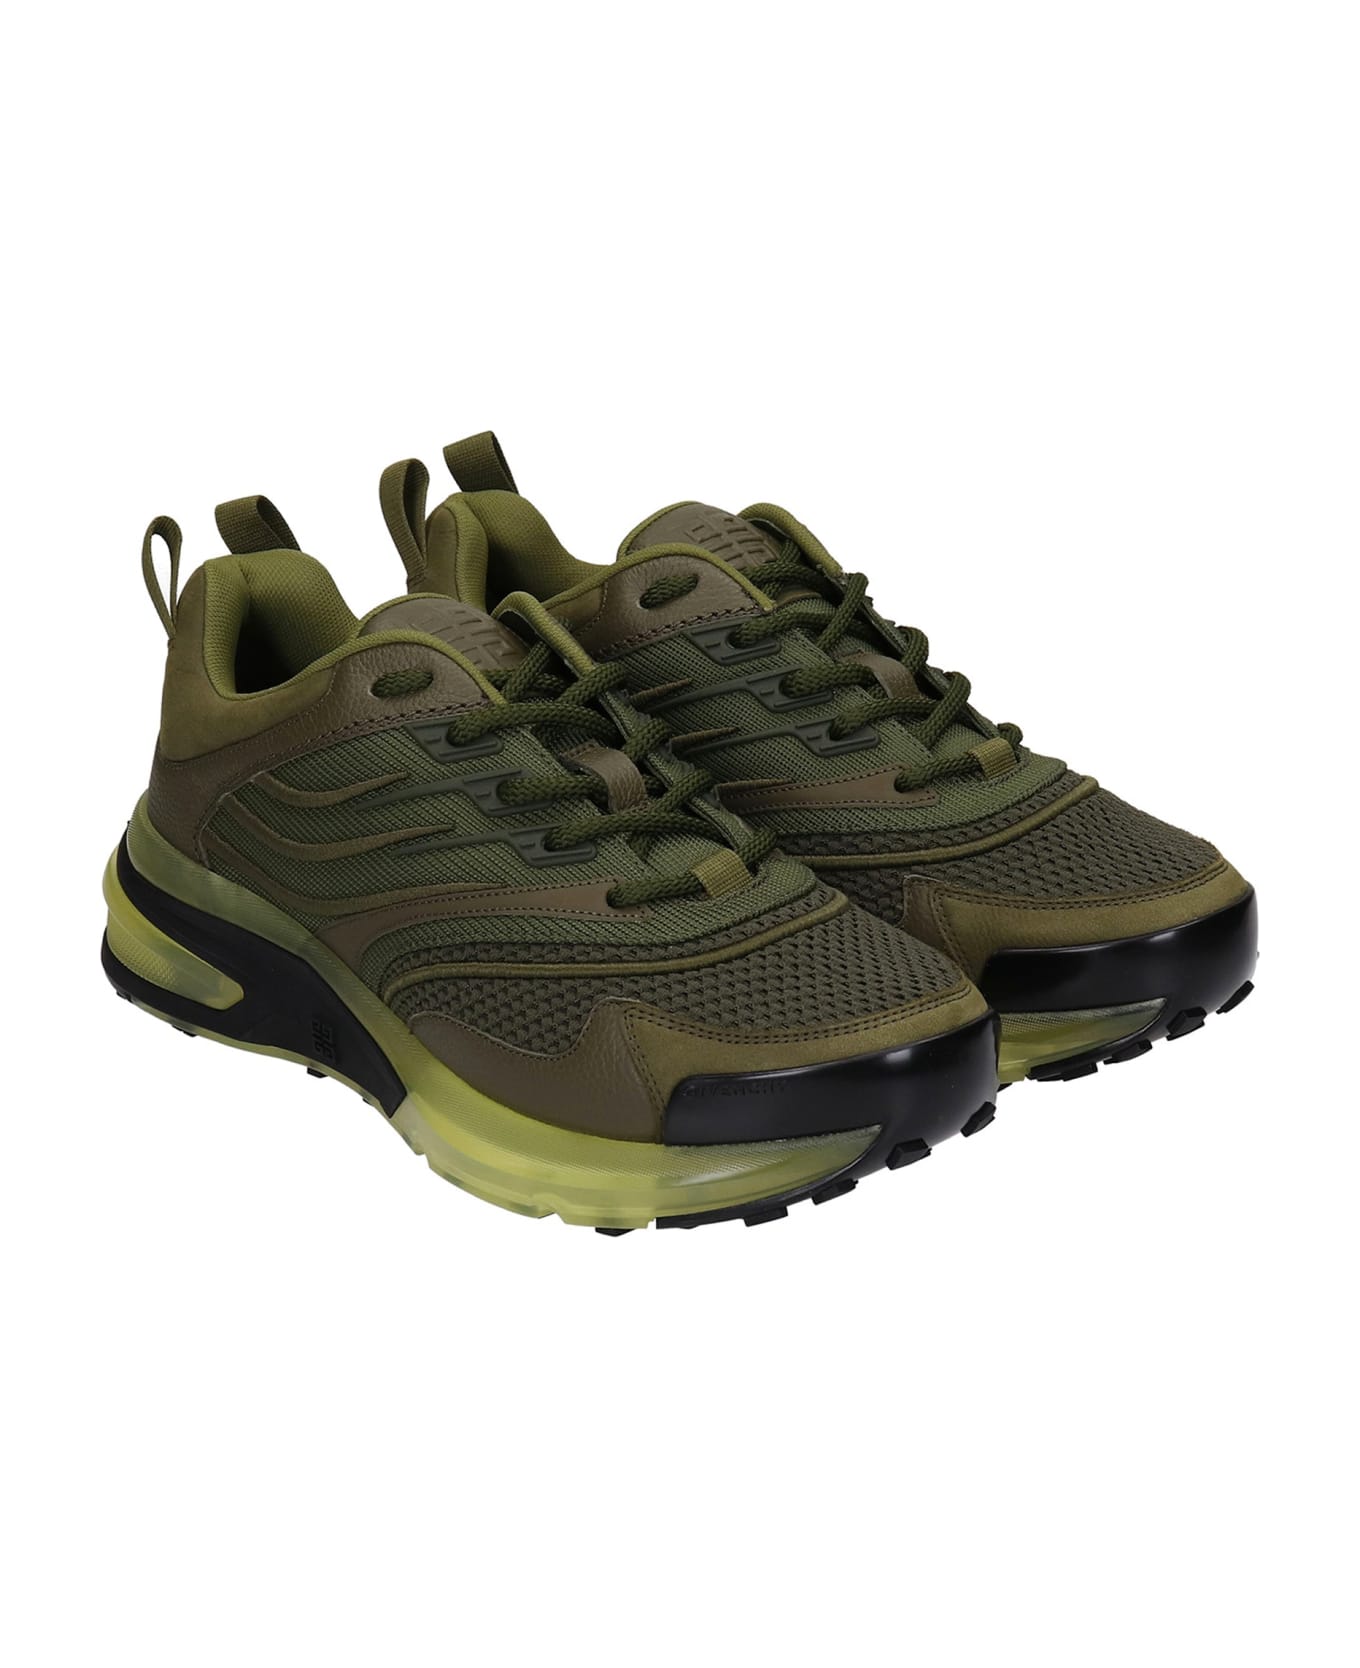 Givenchy Runner Sneakers - Green スニーカー